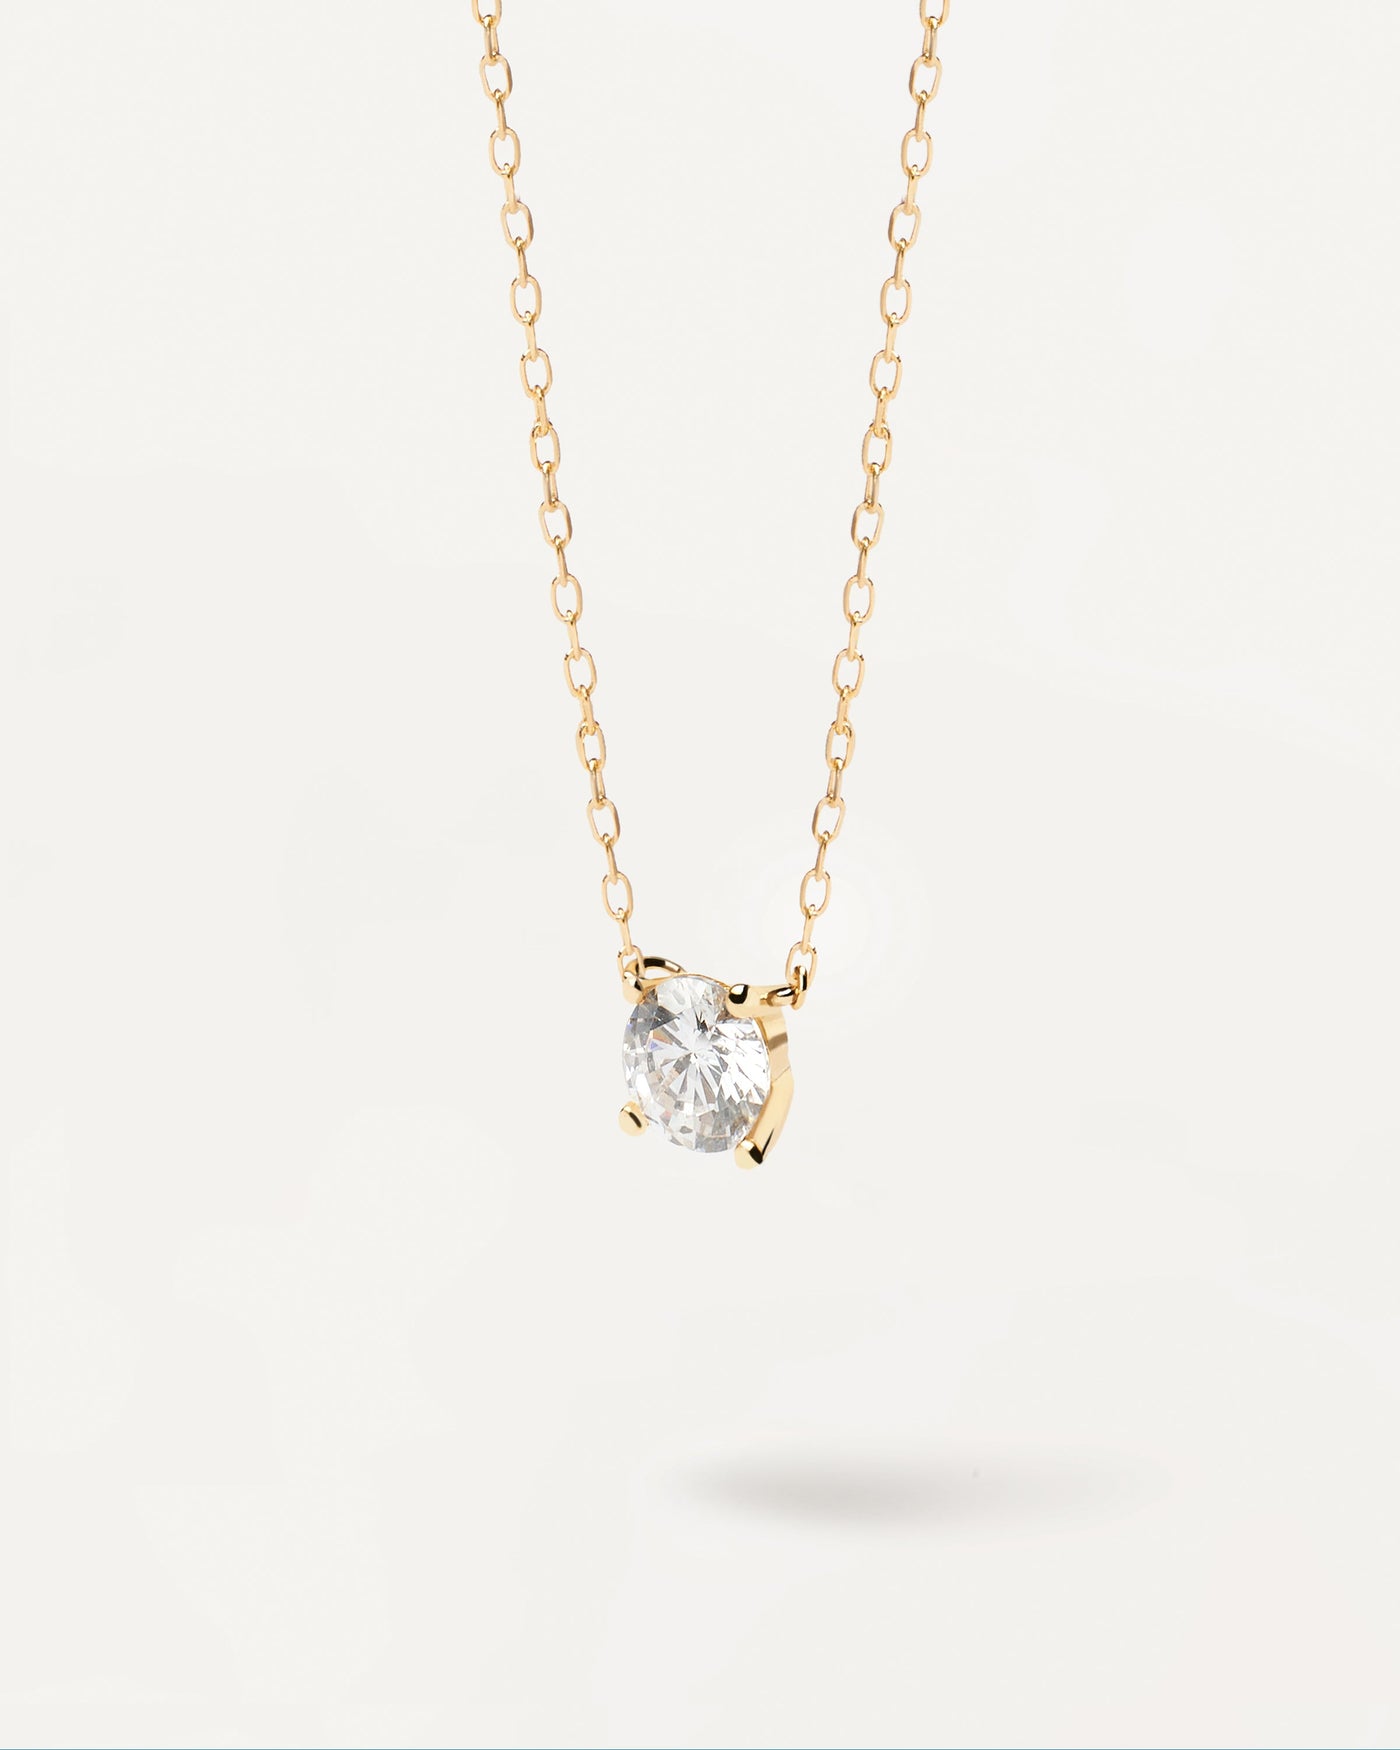 2023 Selection | Diamonds and Gold Solitaire Supreme Necklace. Solid yellow gold chain necklace with big round lab-grown diamond of 0.50 carats. Get the latest arrival from PDPAOLA. Place your order safely and get this Best Seller. Free Shipping.